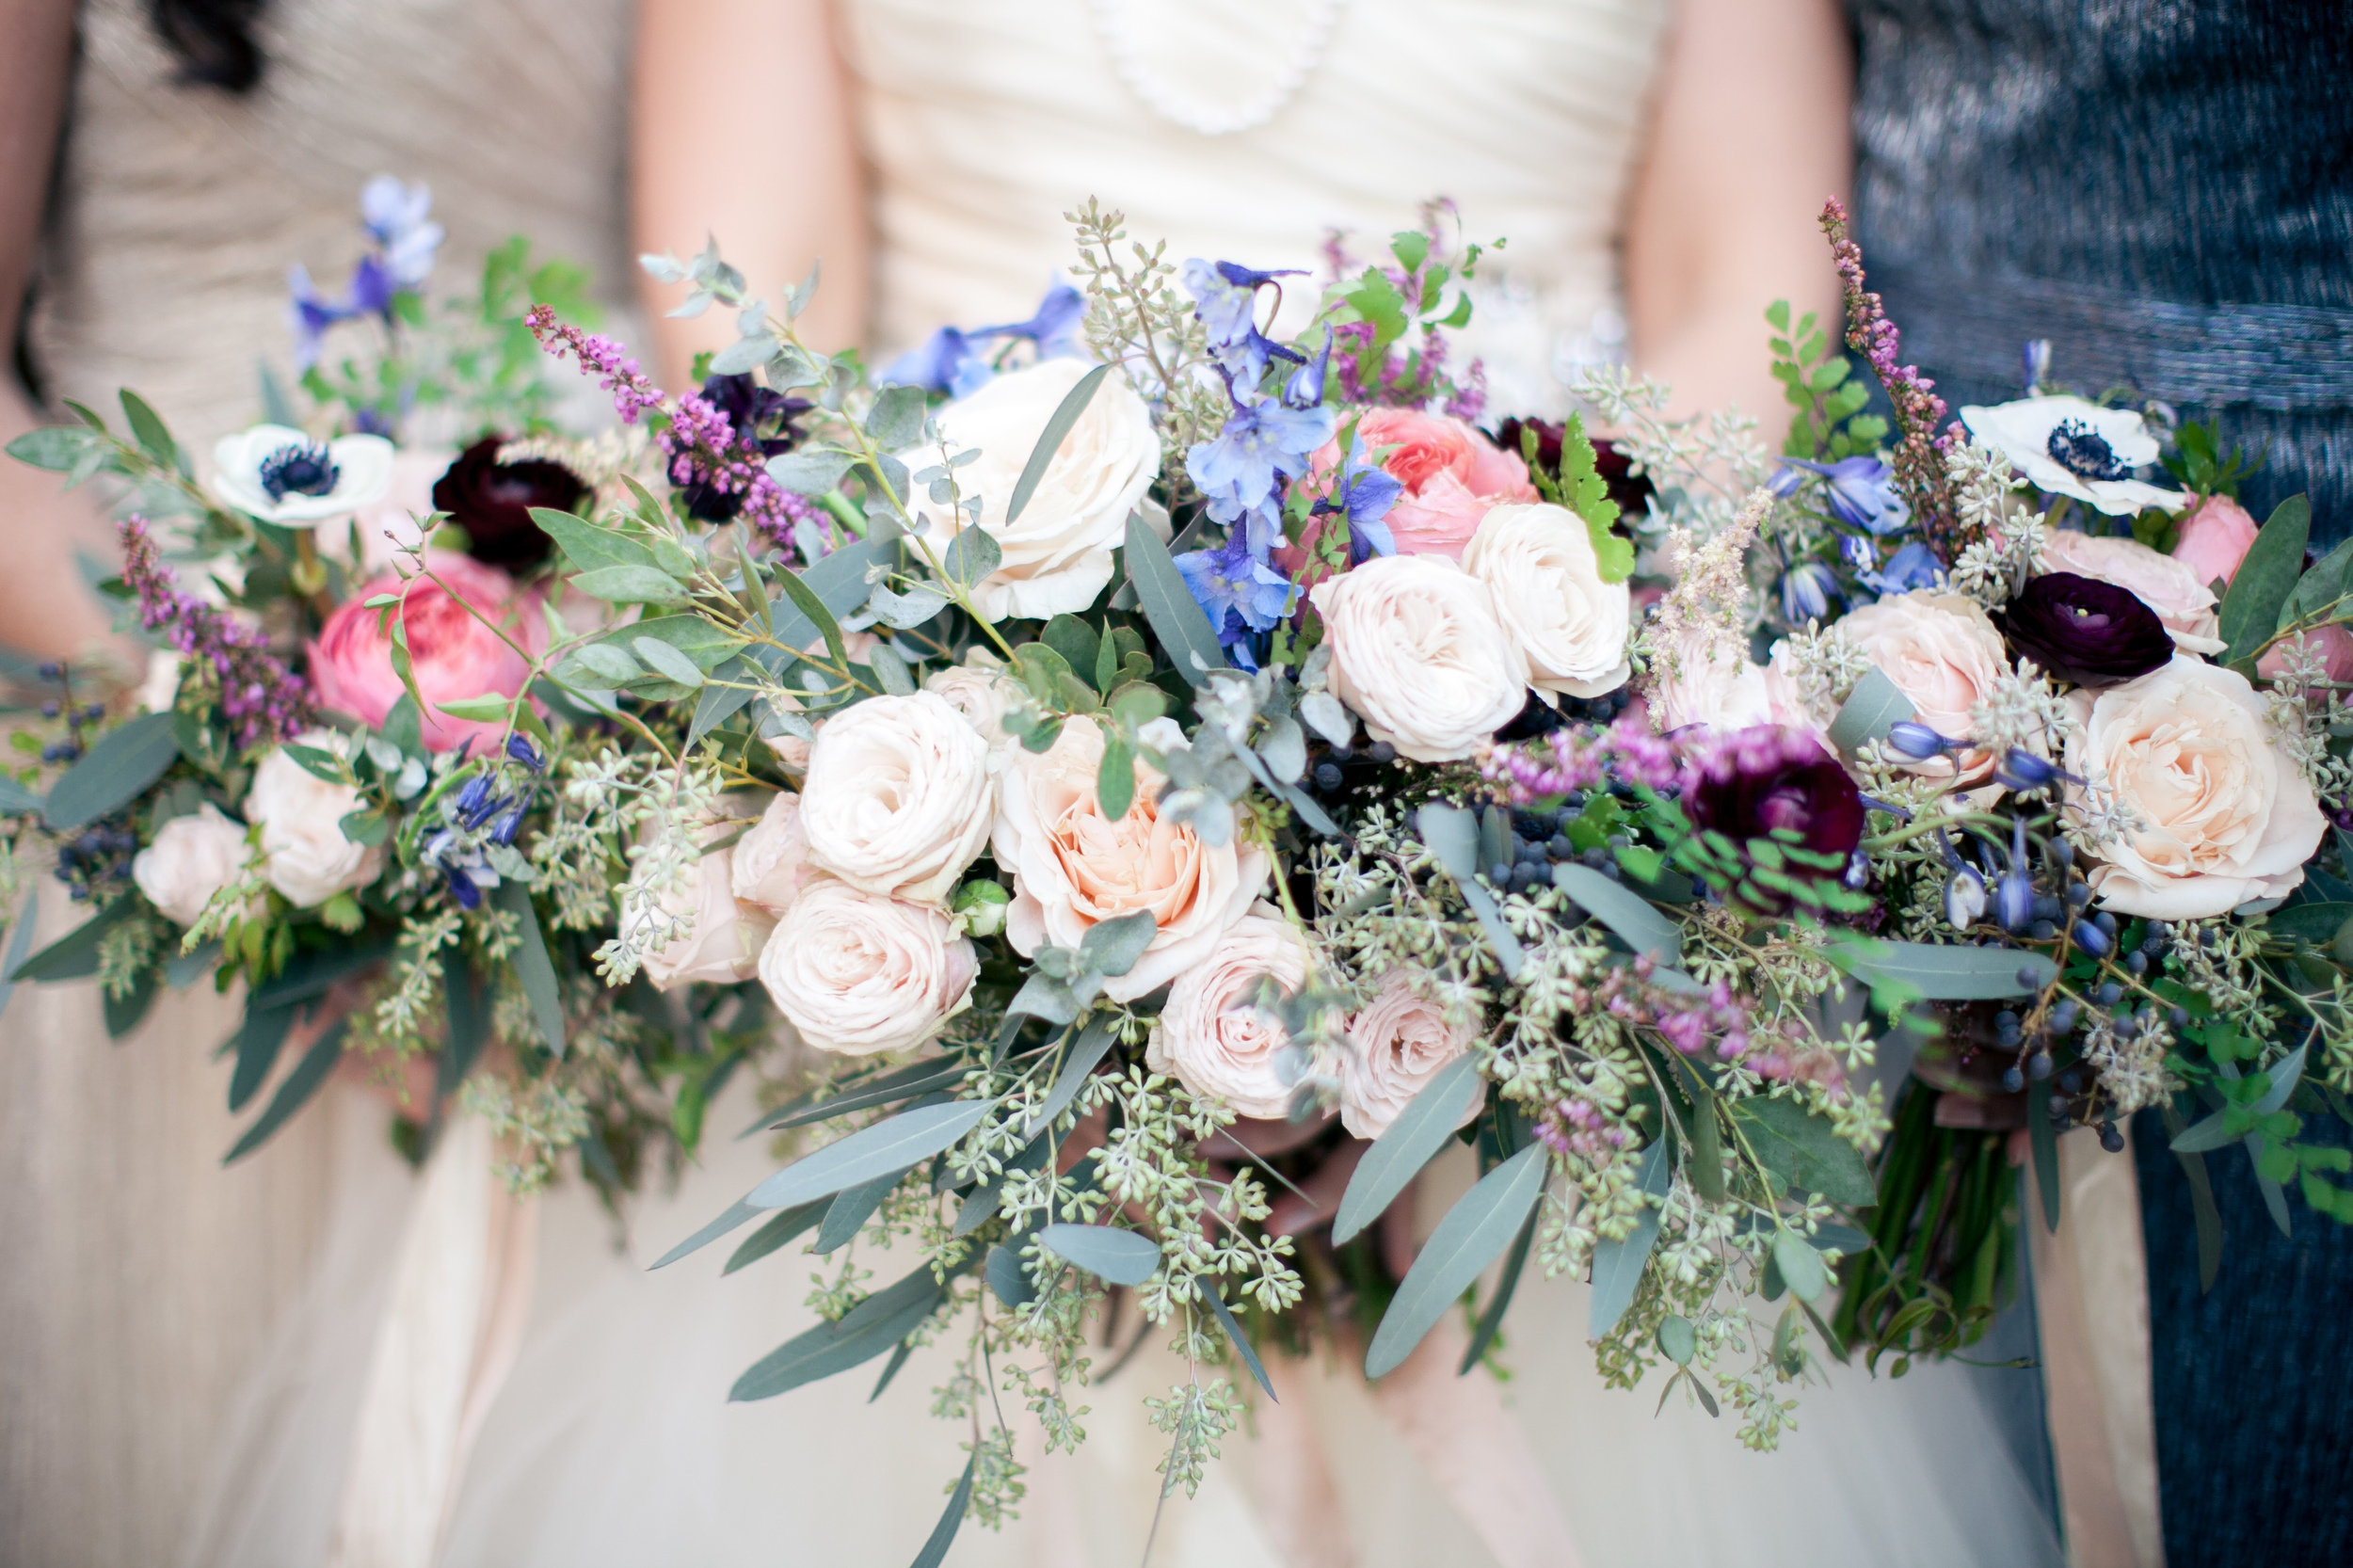 Lush Bouquets with pops of burgundy, rose pink, and blue